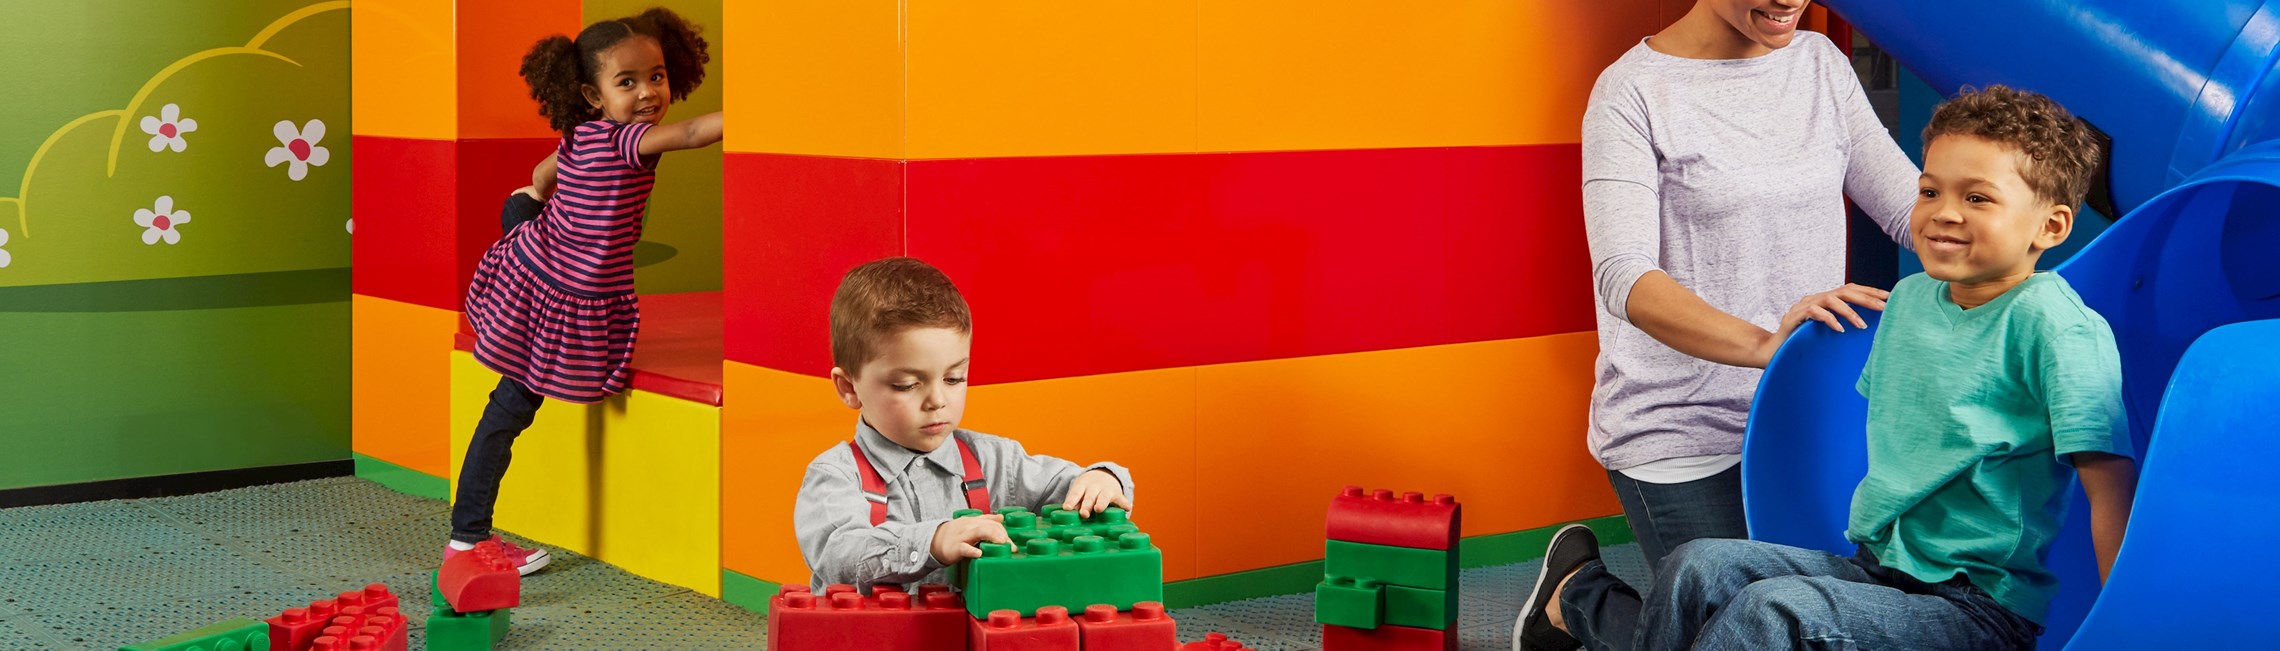 Duplo Park | LEGOLAND Discovery Center New Jersey